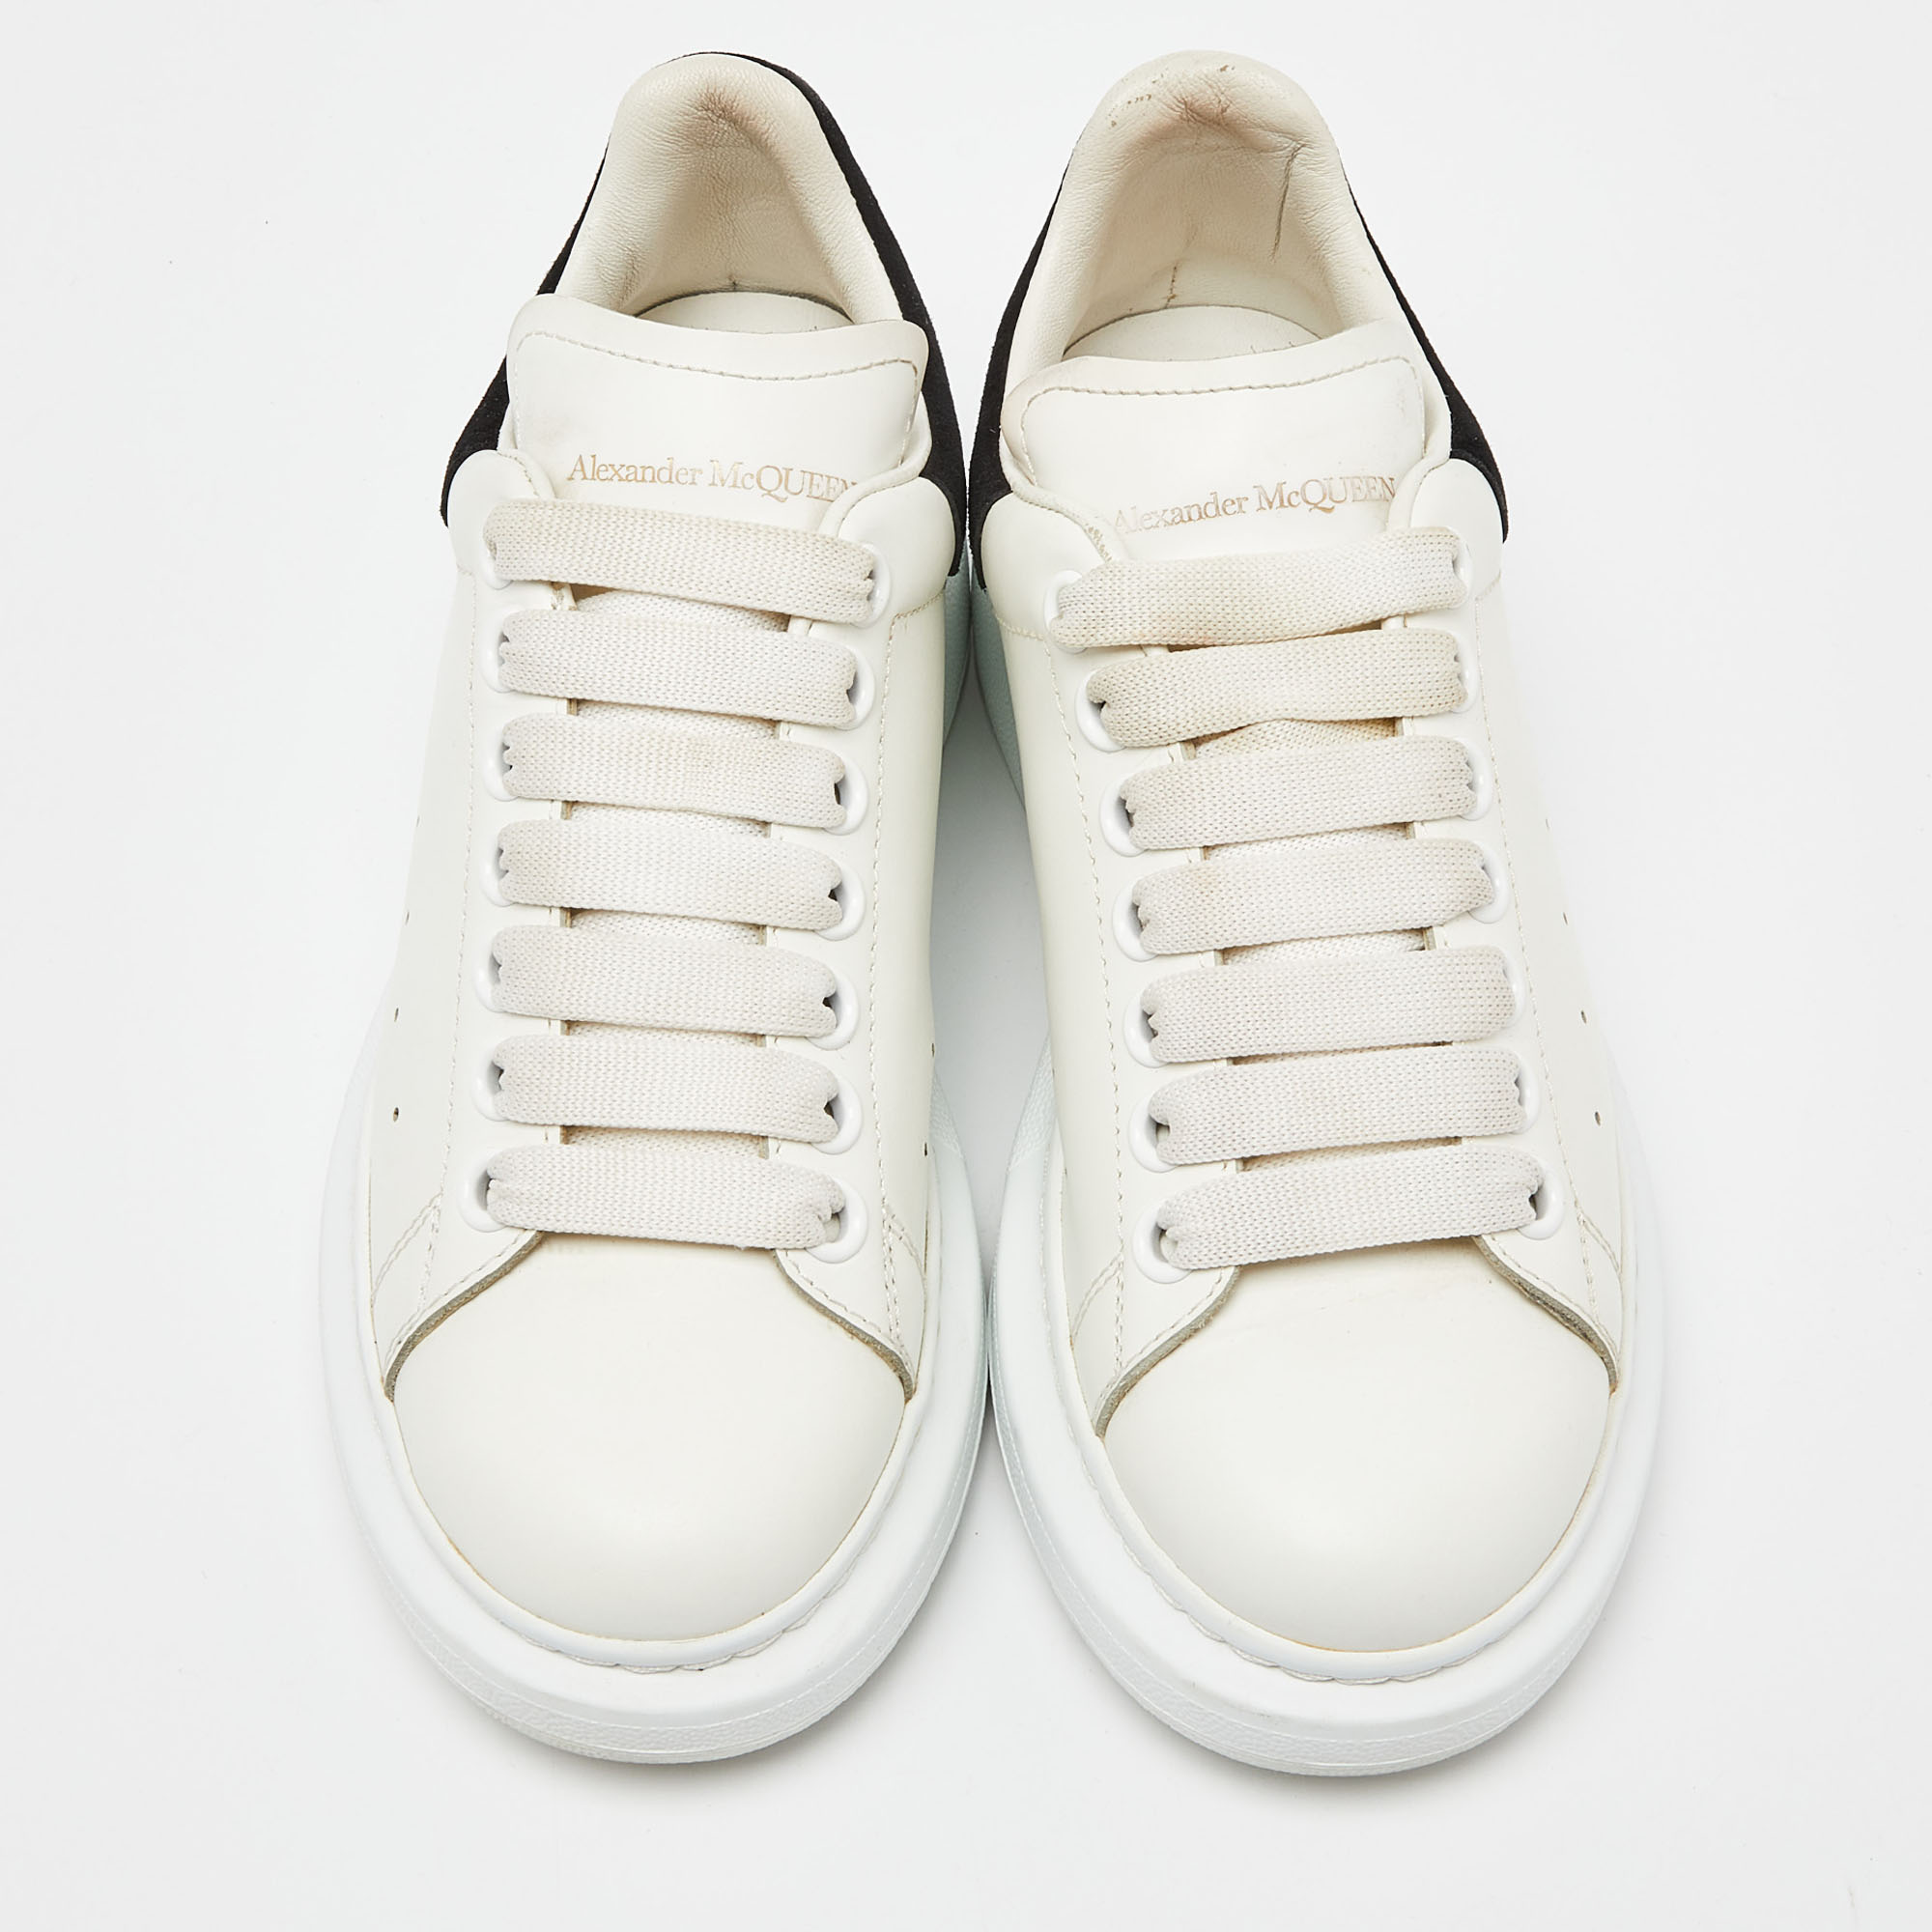 Alexander McQueen White/Black Leather And Suede Oversized Low Top Sneakers Size 36